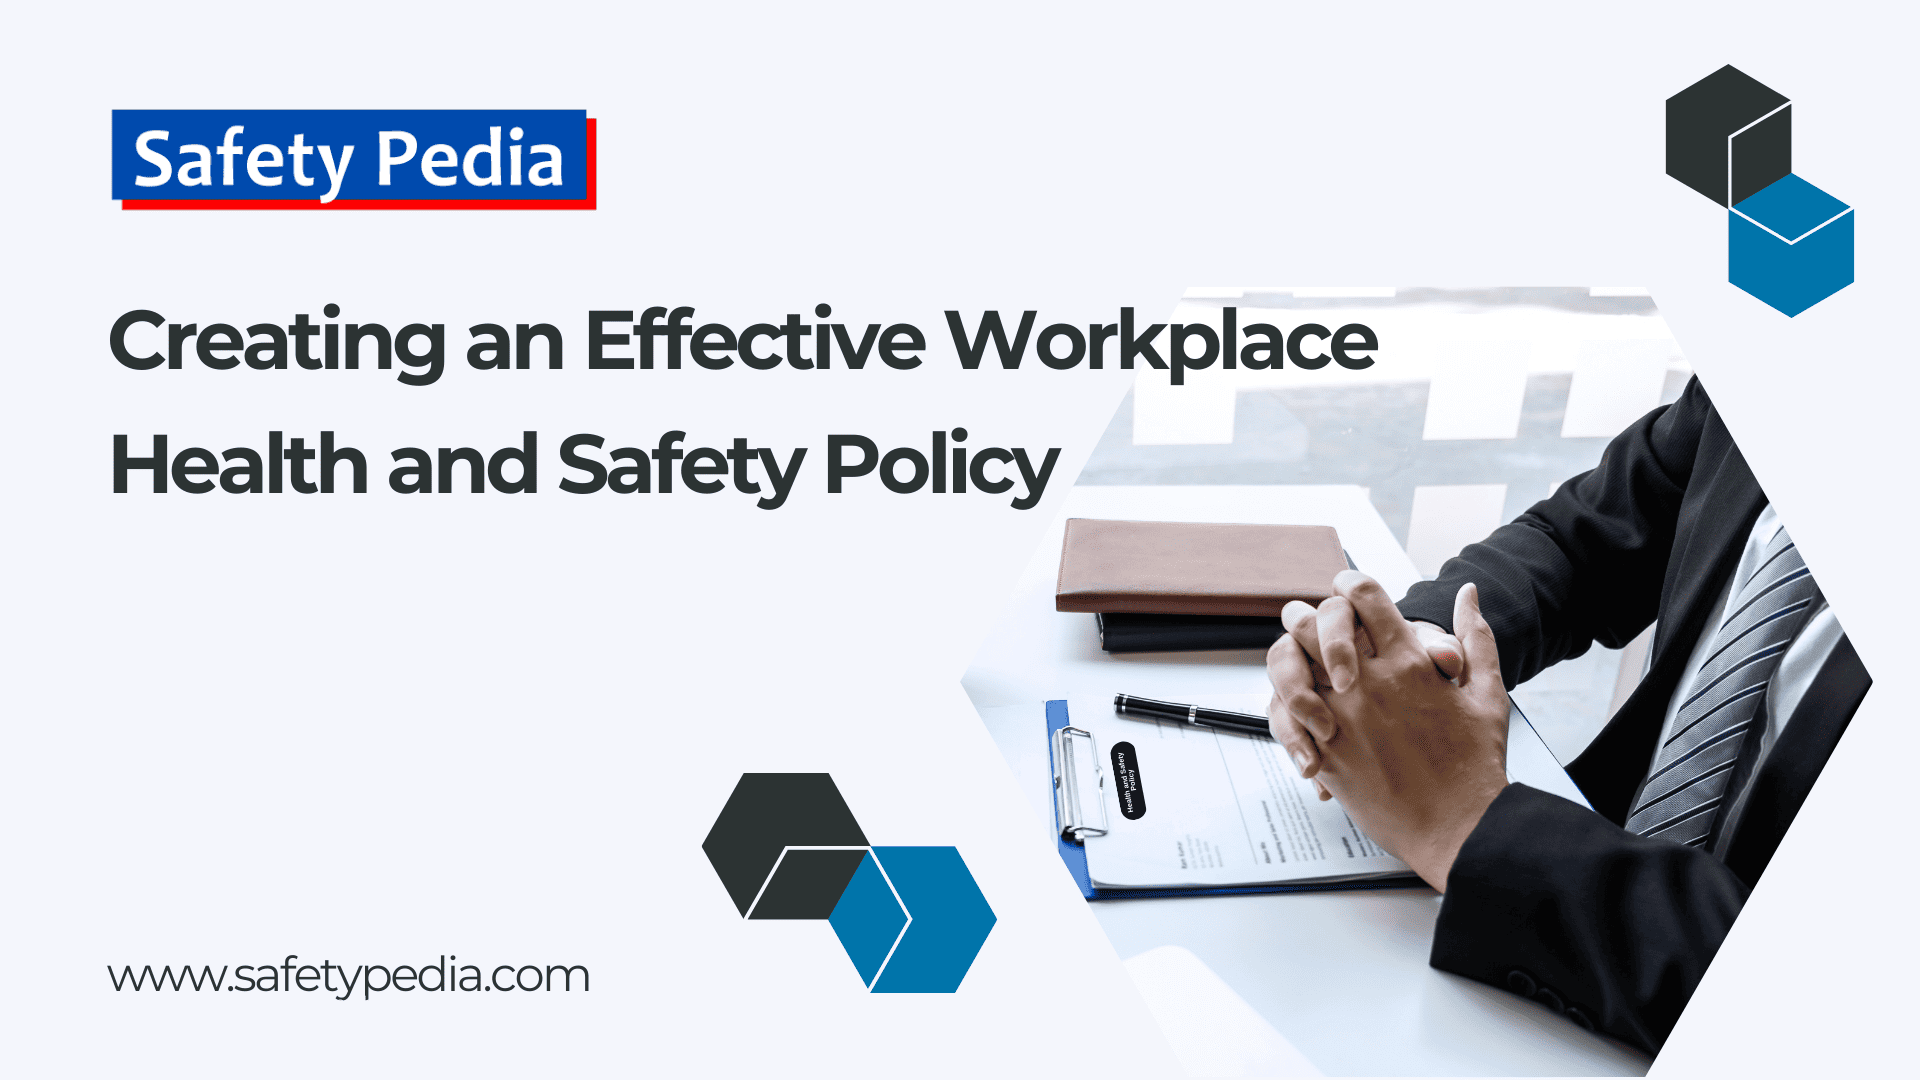 Health and Safety Policy Safetypedia